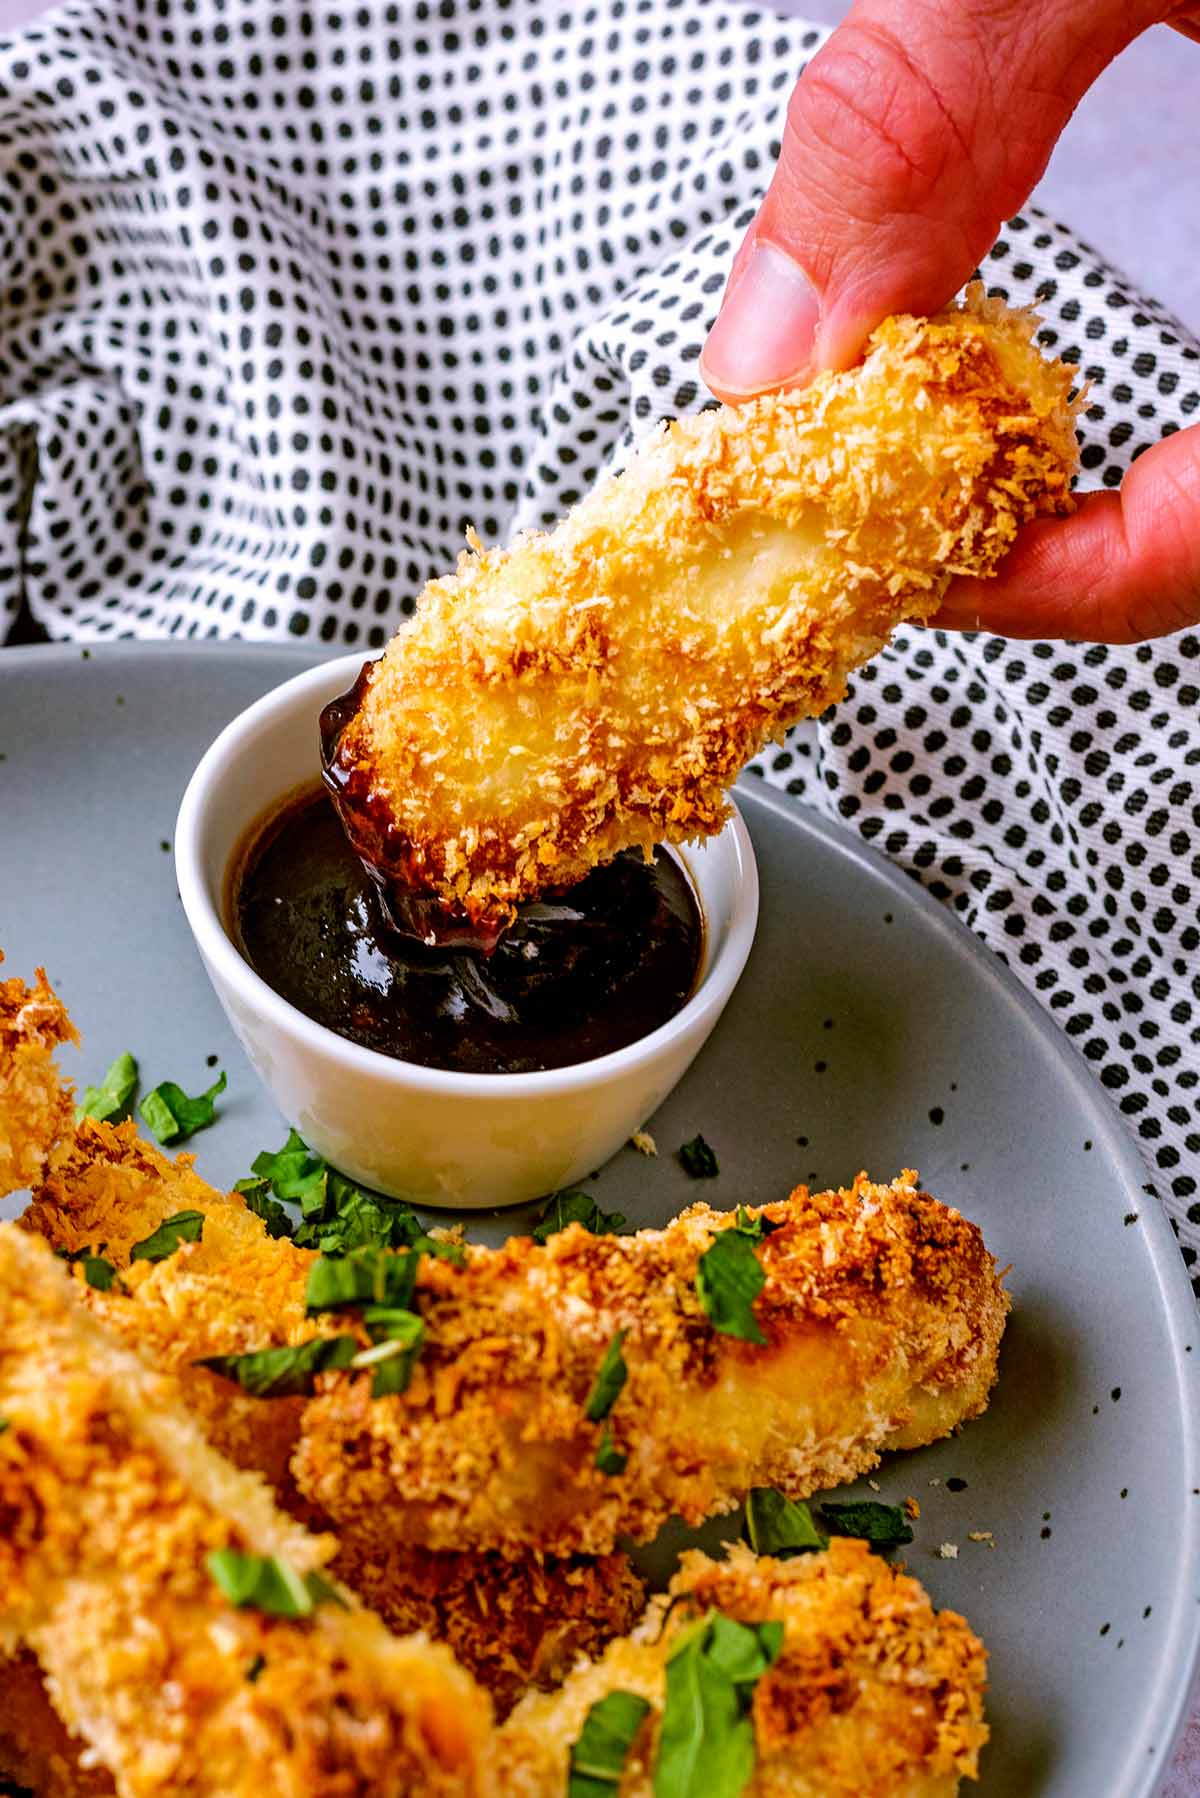 A halloumi fry being dipped into a small pot of barbecue sauce.